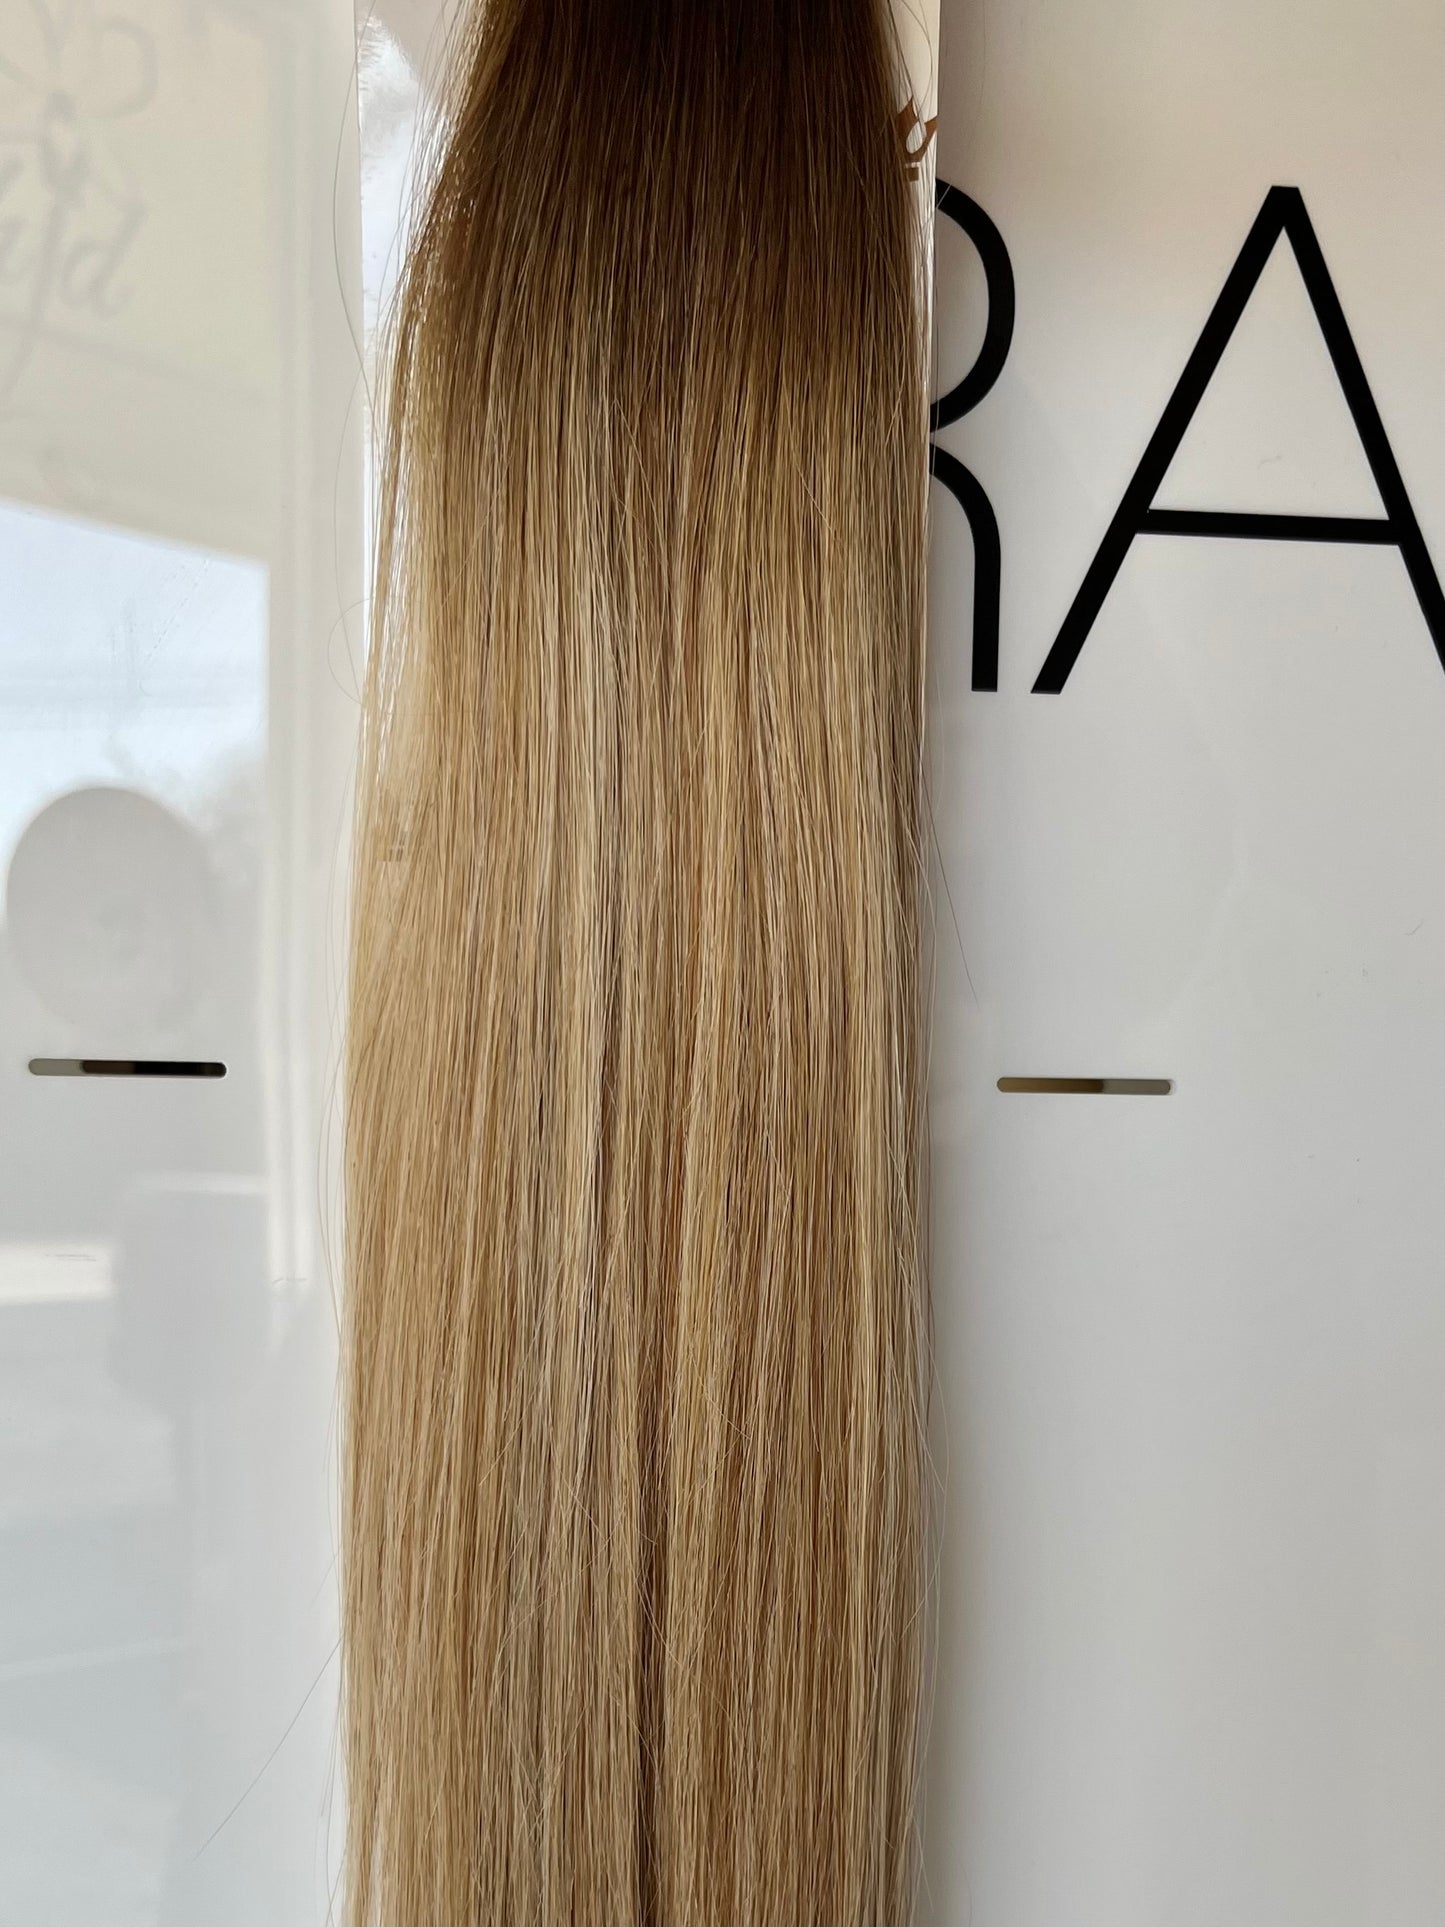 RETAIL HALO EXTENSIONS - BALAYAGE - TOASTED AMBER